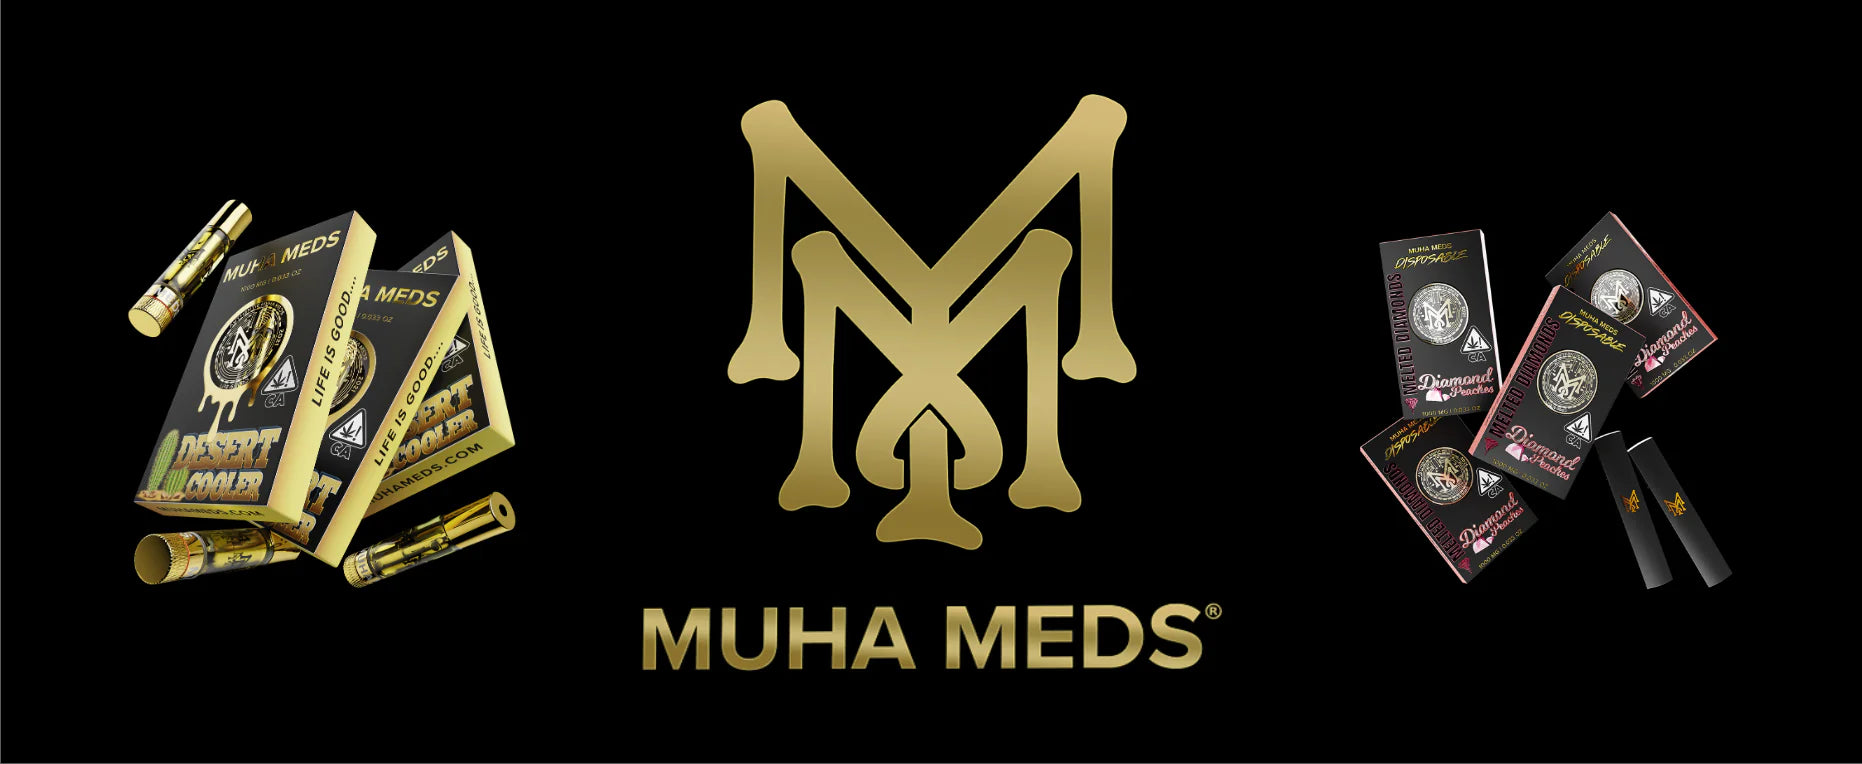 Muha Meds: The Future of Ethical Cannabis Vaping